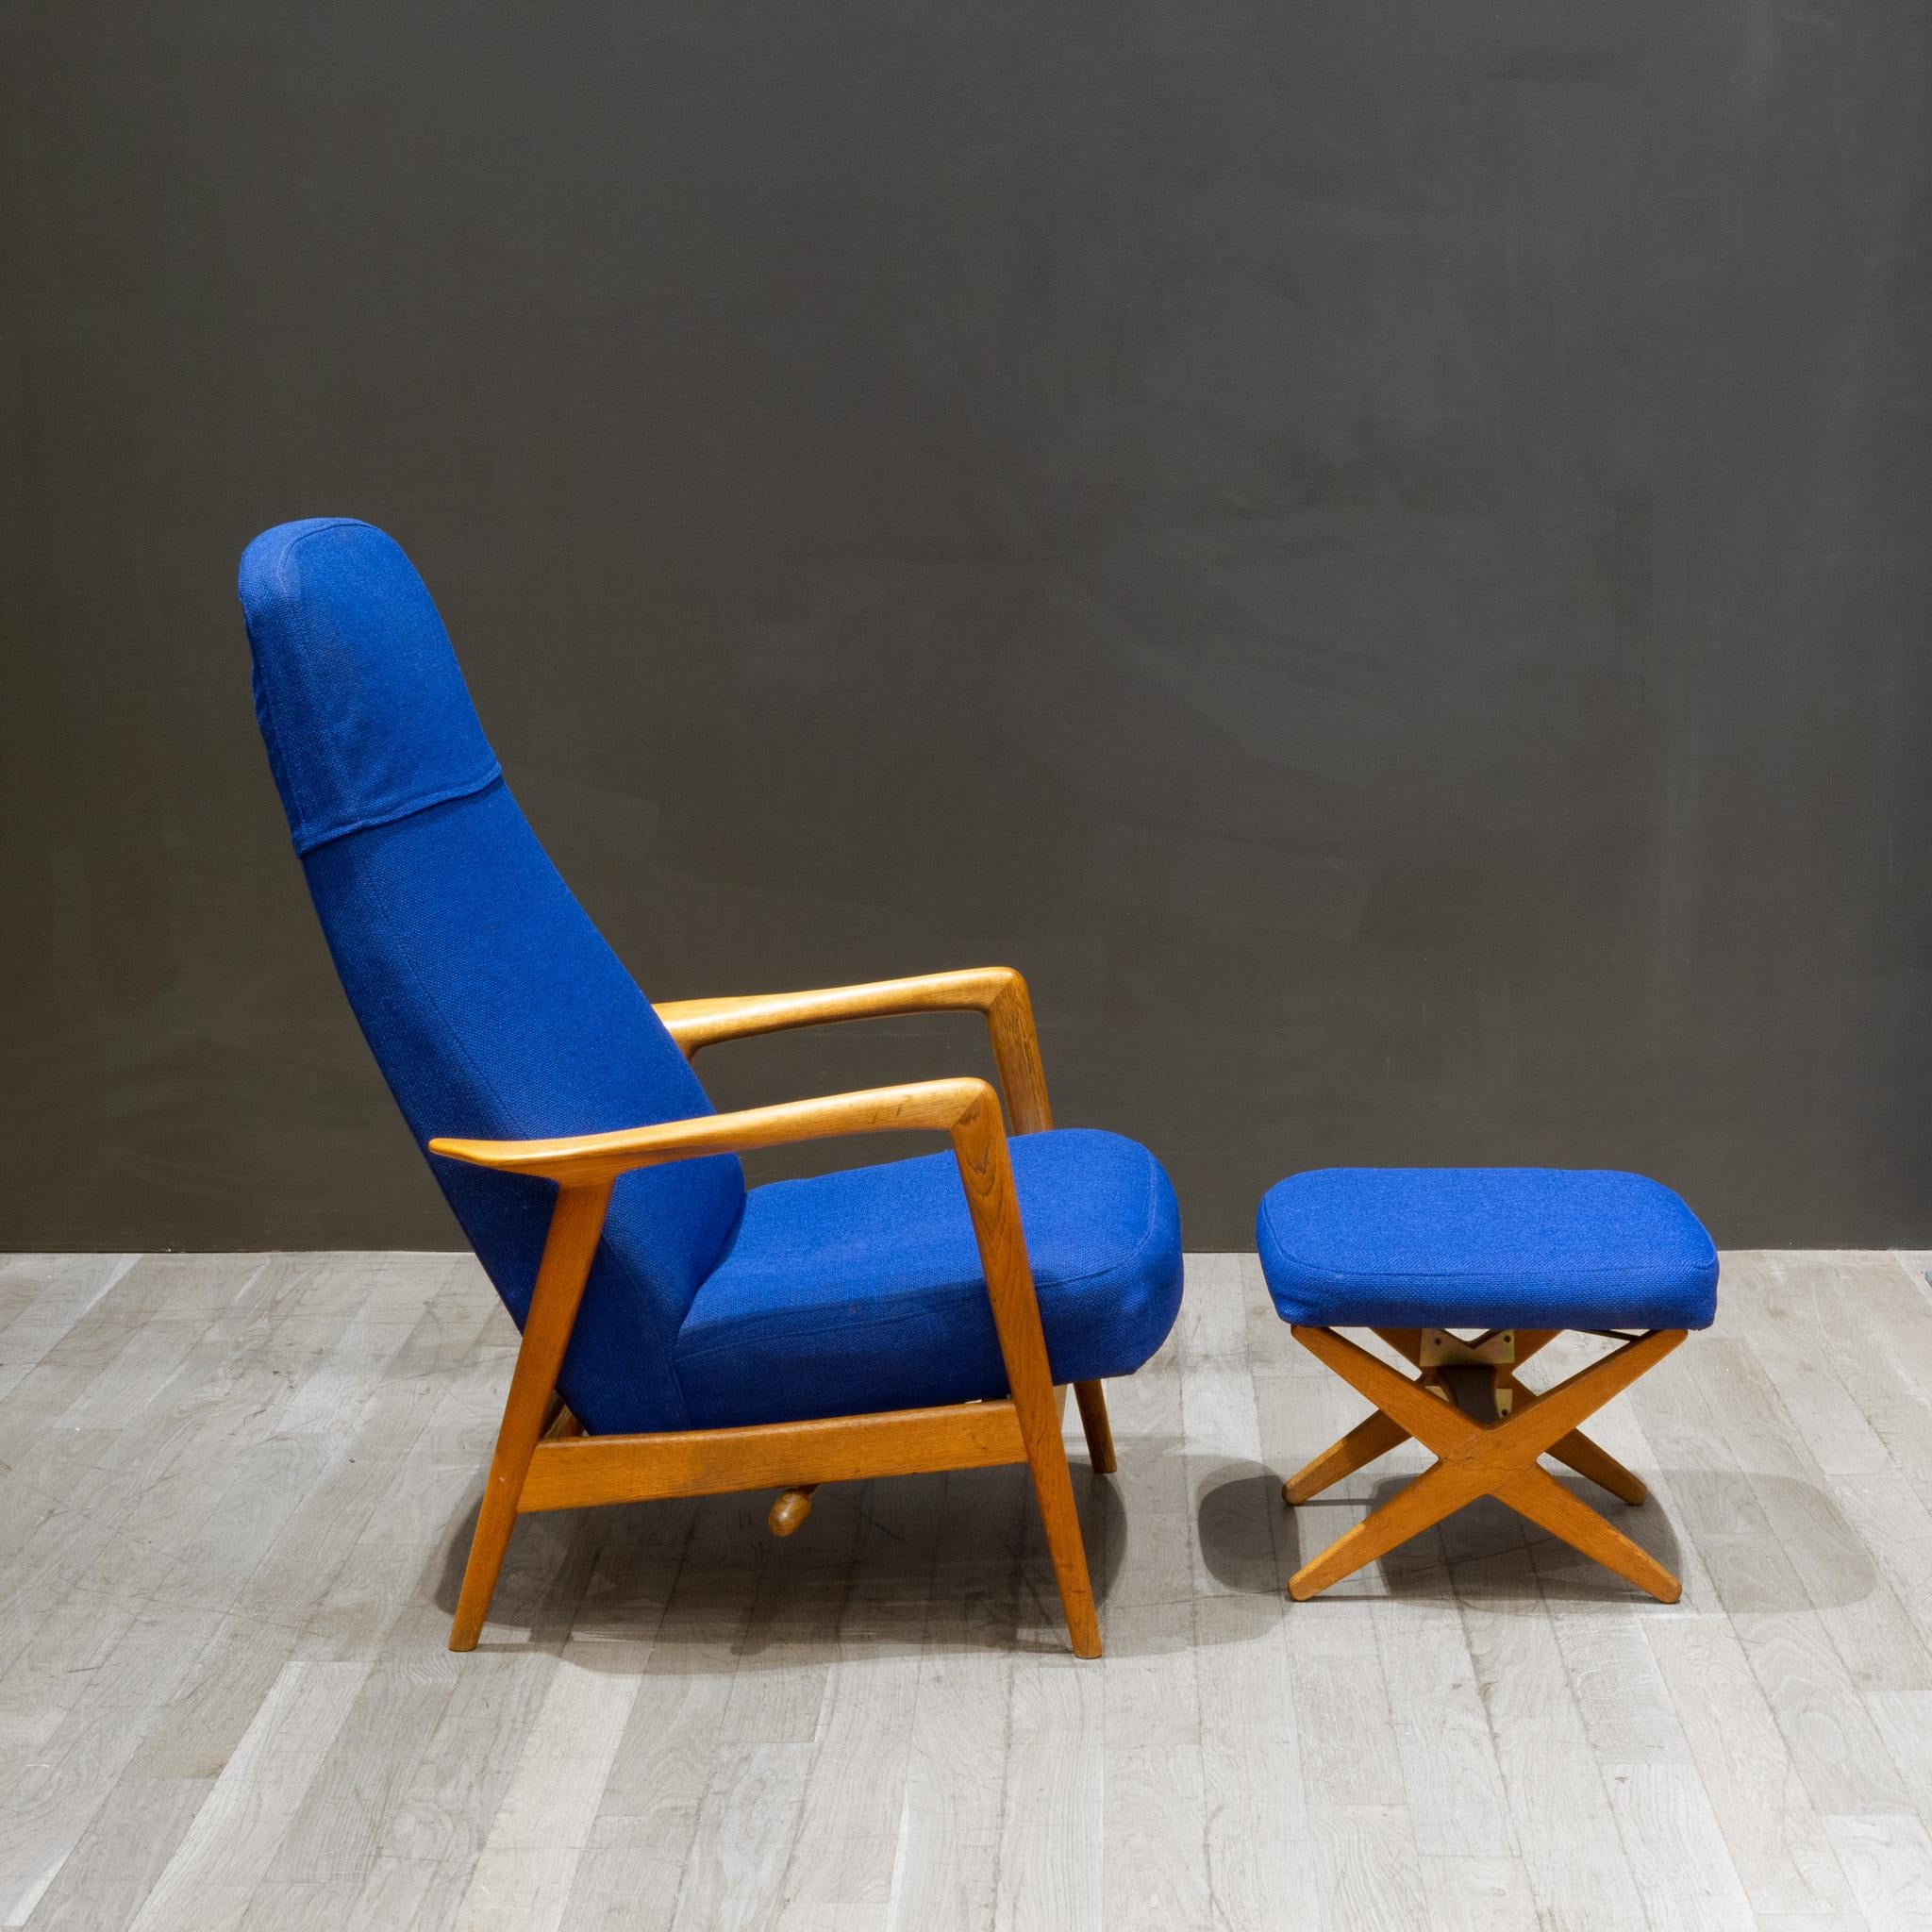 20th Century MCM Folke Ohlsson for DUX Reclining Lounge Chairs and Adjustable Ottomans C.1960